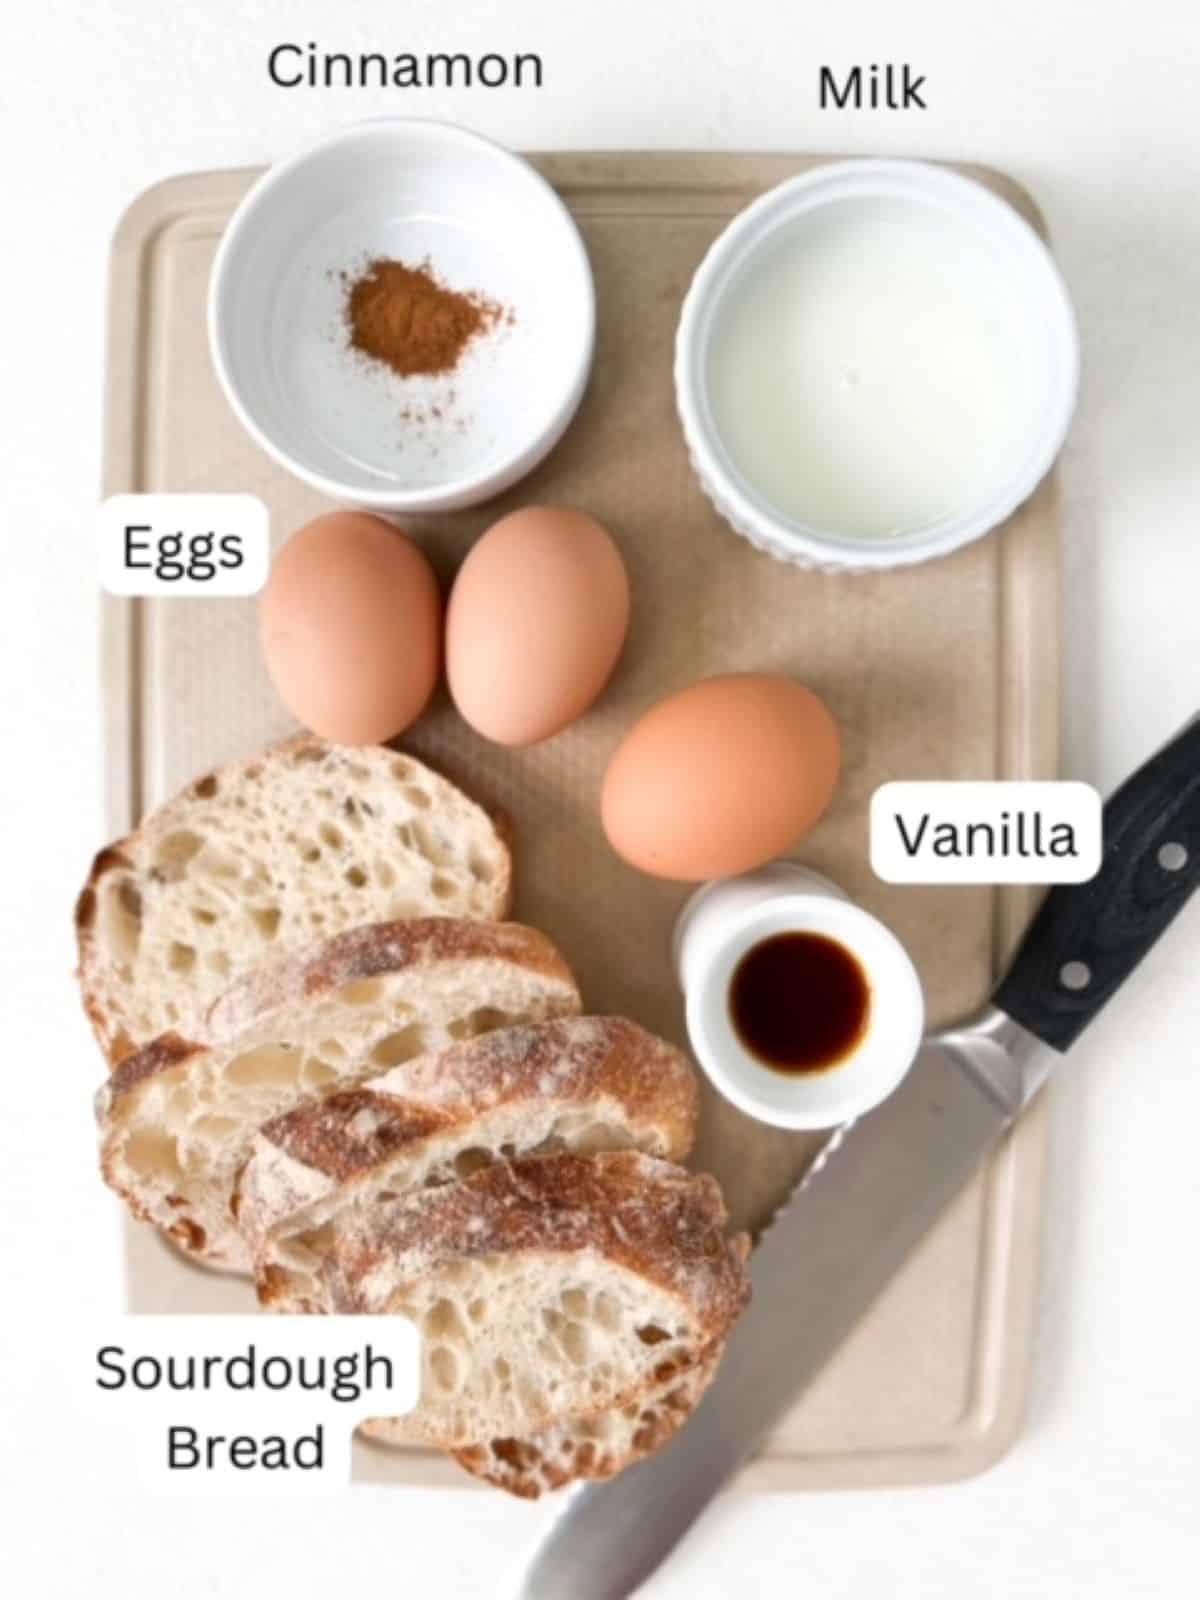 Slices of sourdough bread, milk, eggs, vanilla, cinnamon, and a bread knife on top of a cutting board. All ingredients are labeled.